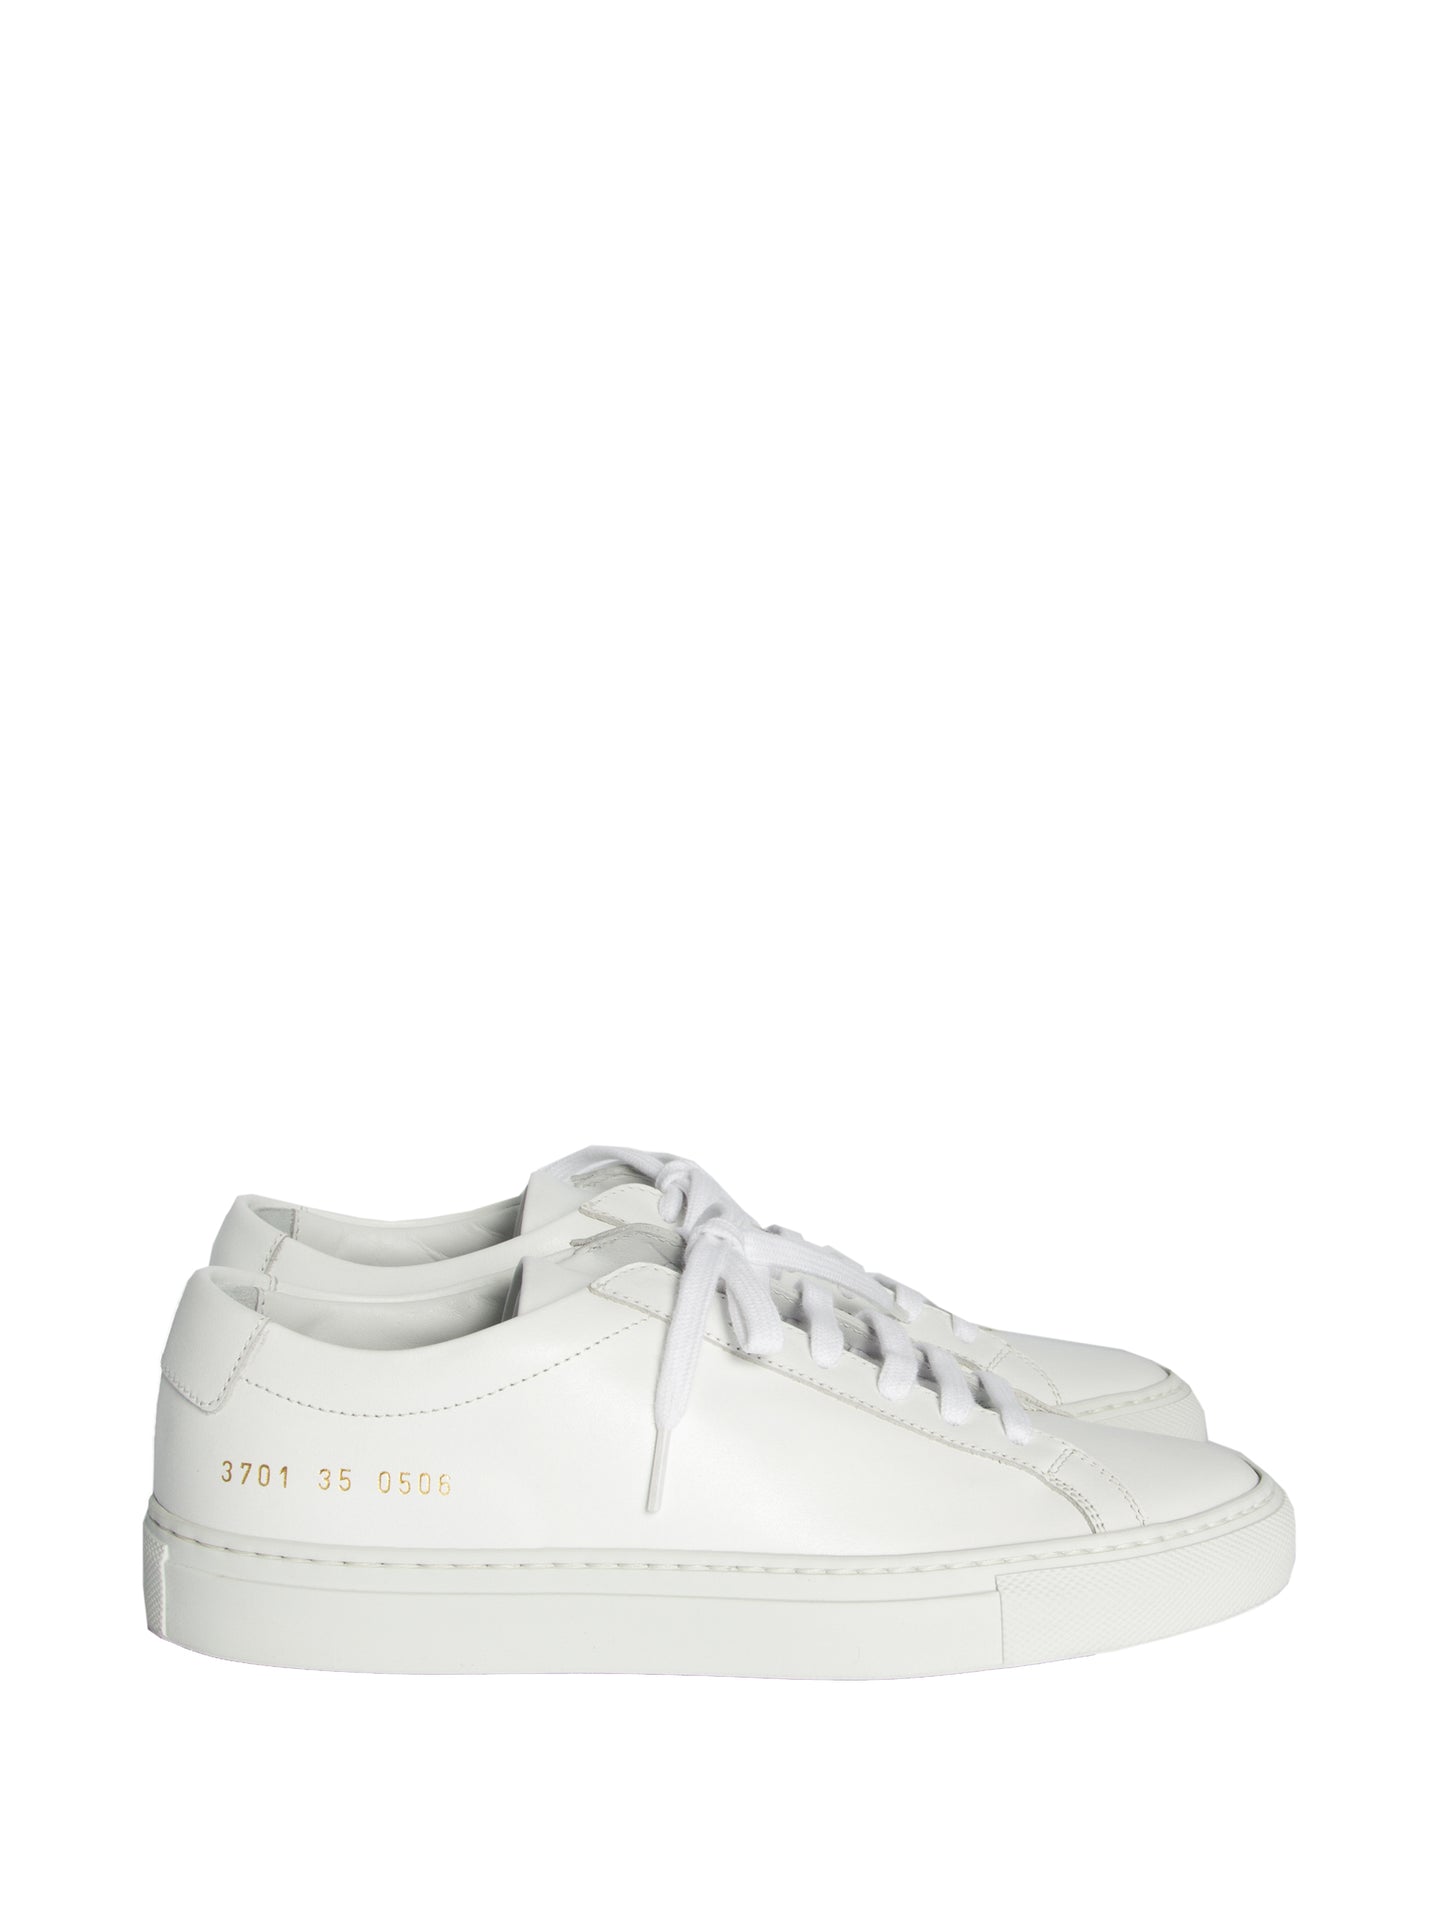 Common Projects Platform-Sneakers mit Schnürung